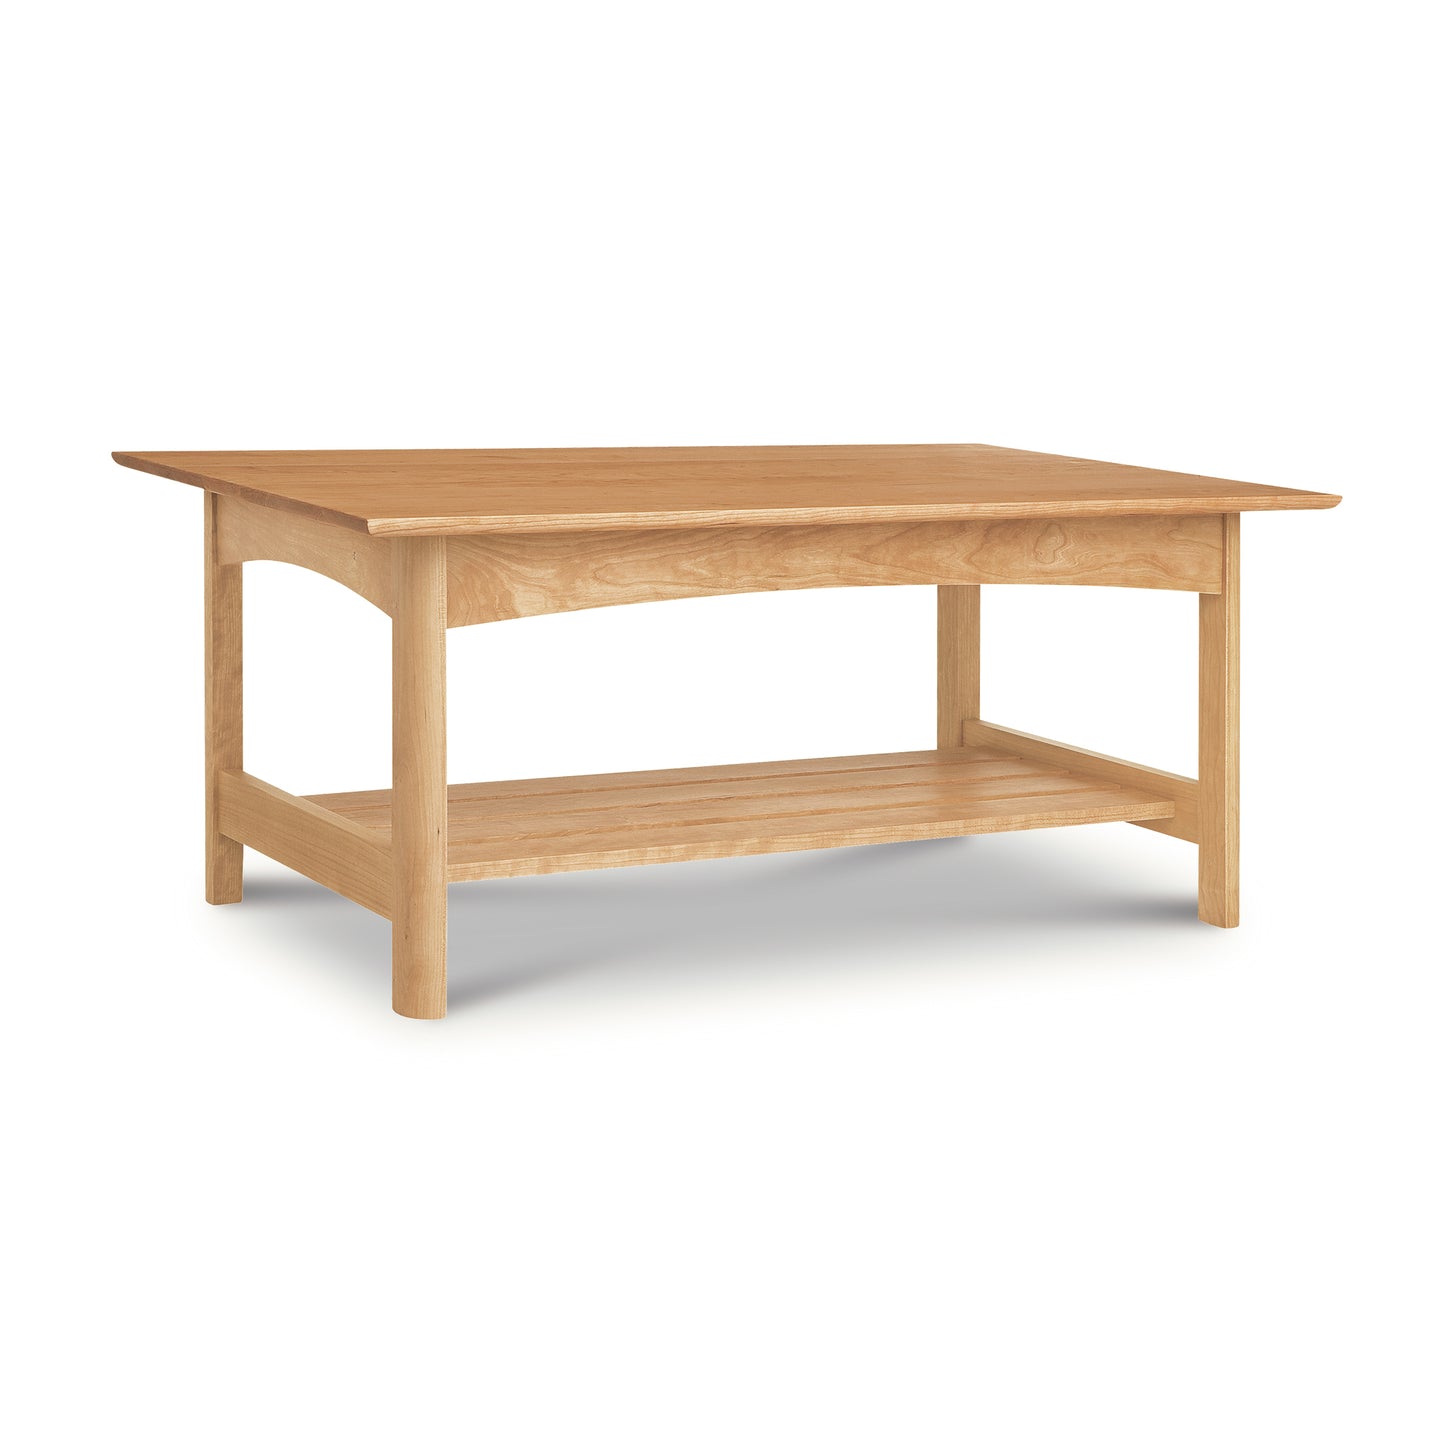 A handmade Vermont Furniture Designs Heartwood Shaker Coffee Table with a lower shelf, isolated on a white background.